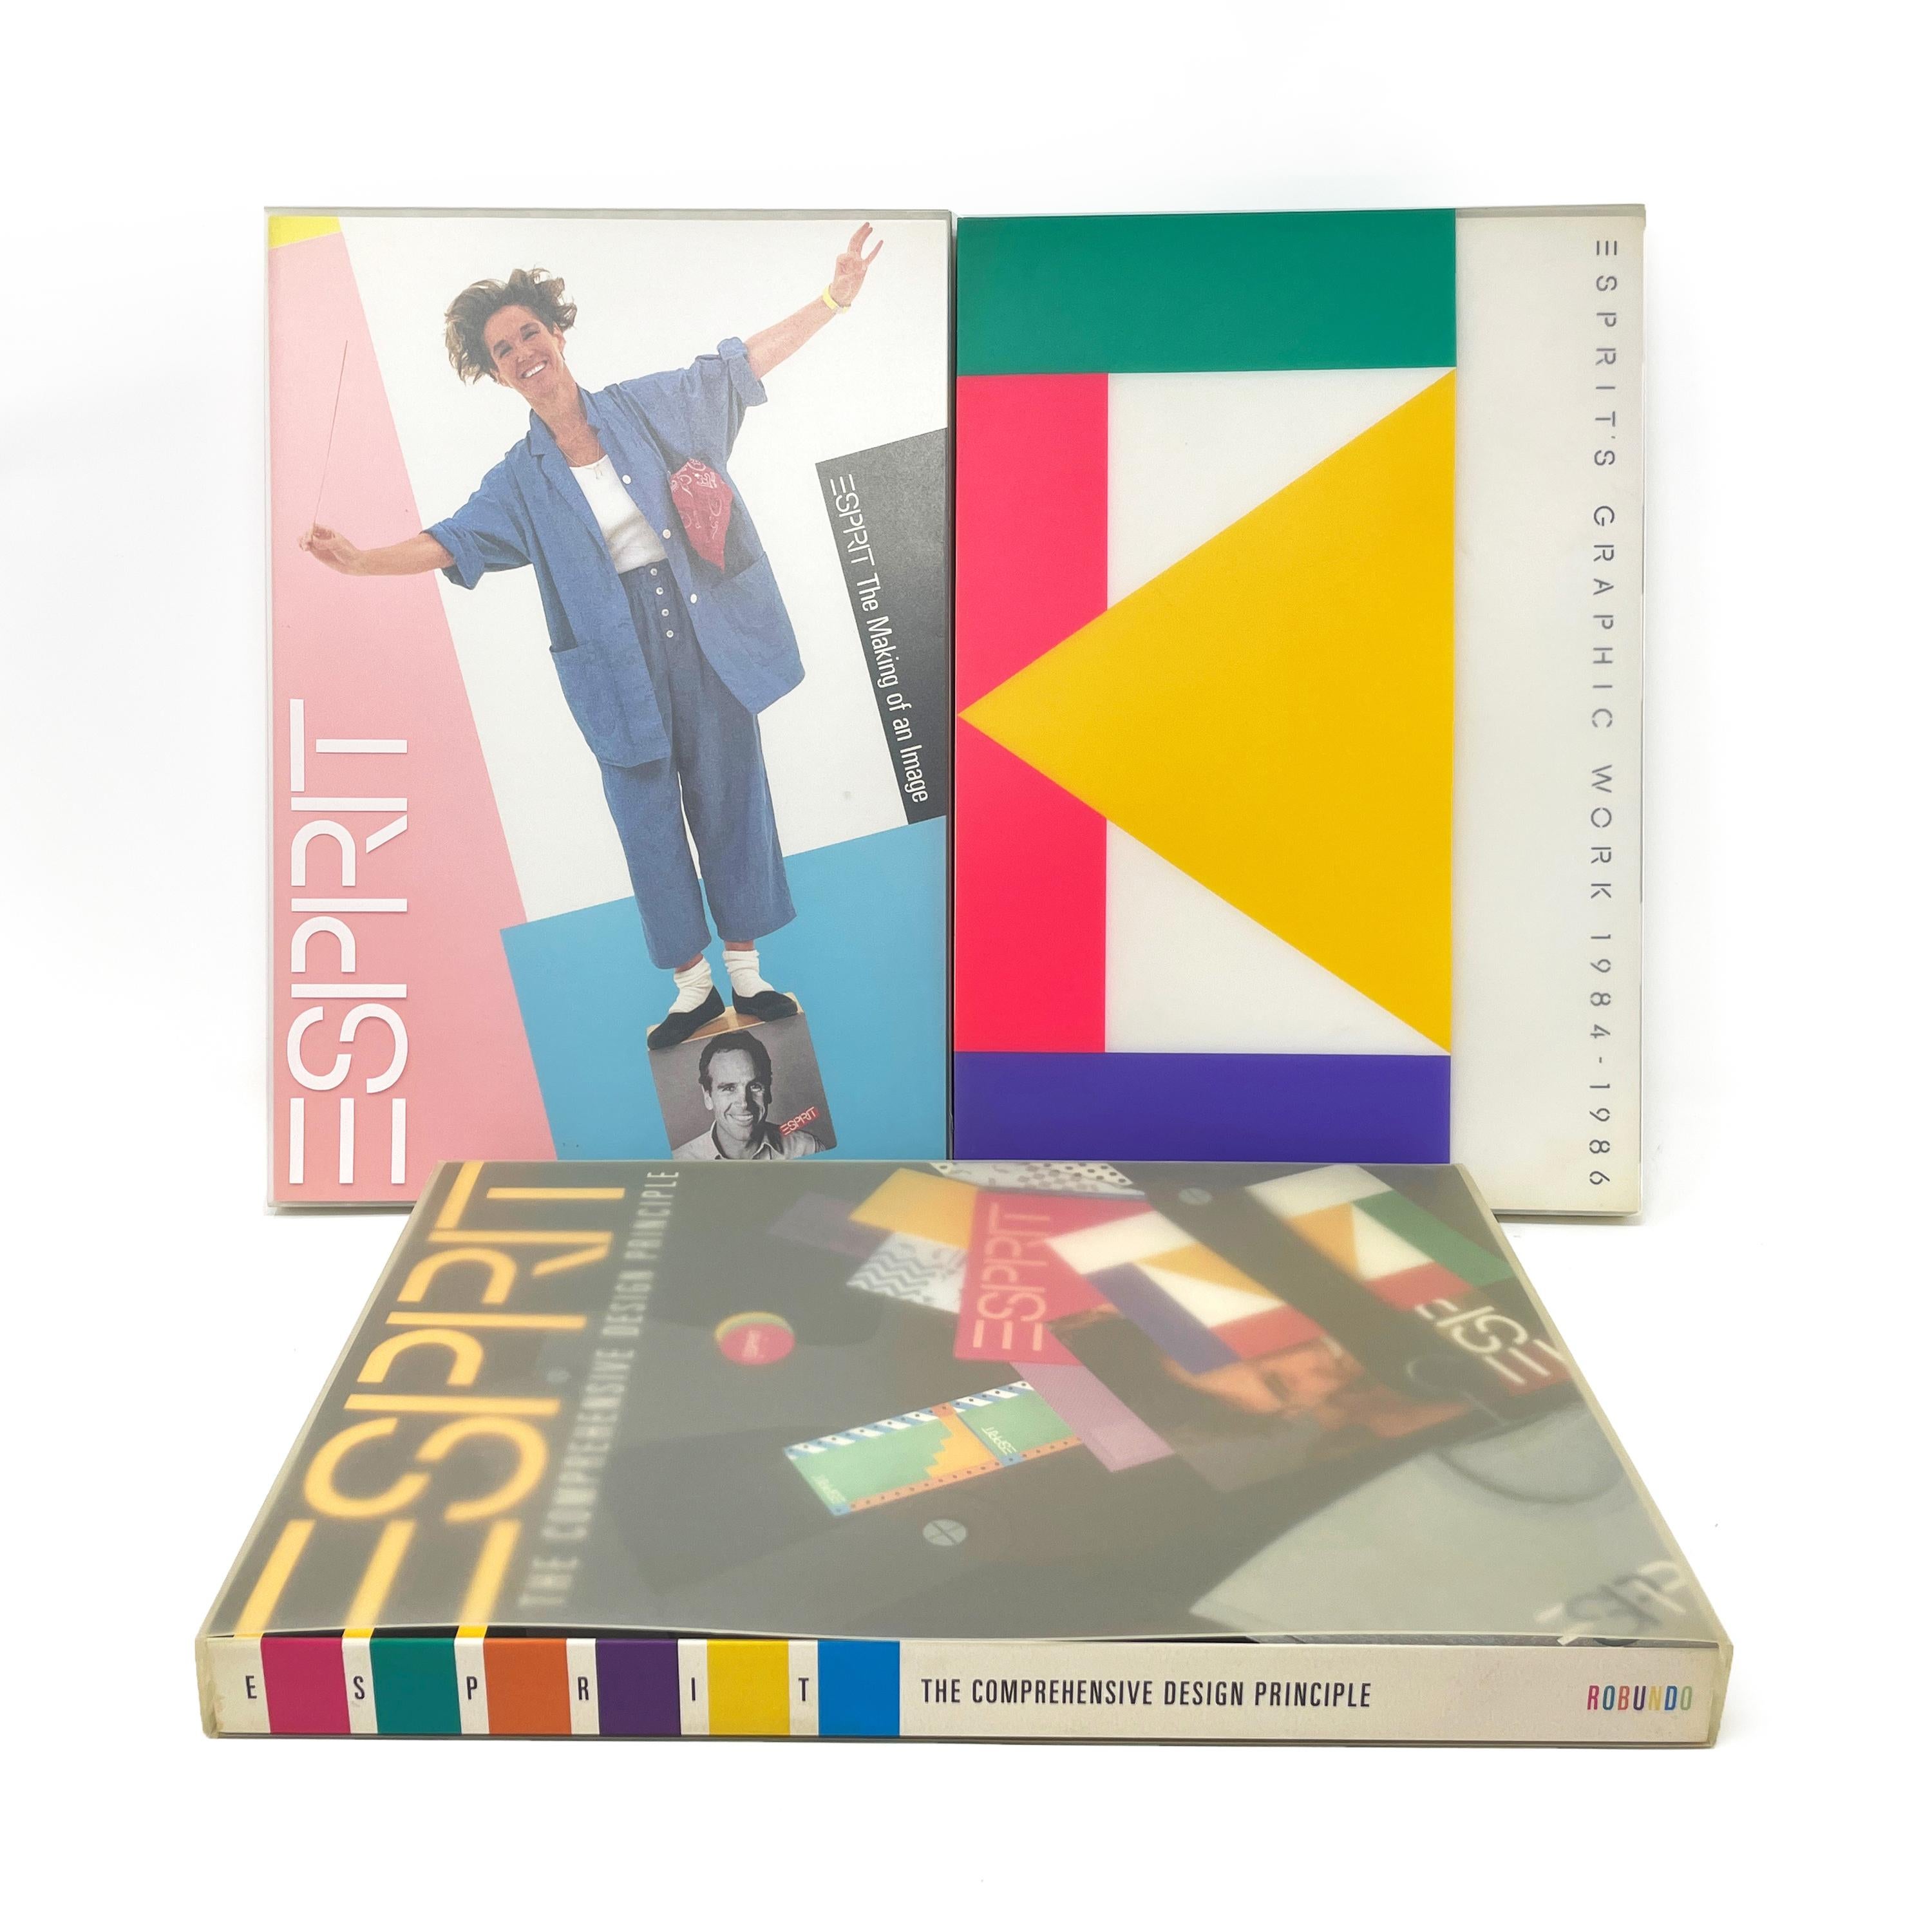 A gorgeous oversized softcover book filled with hundreds of color images of Esprit ads, graphic design, point of sale assets, catalogs, packaging, tags and other design memorabilia from the years 1984-1986. This book is a celebration of Esprit's